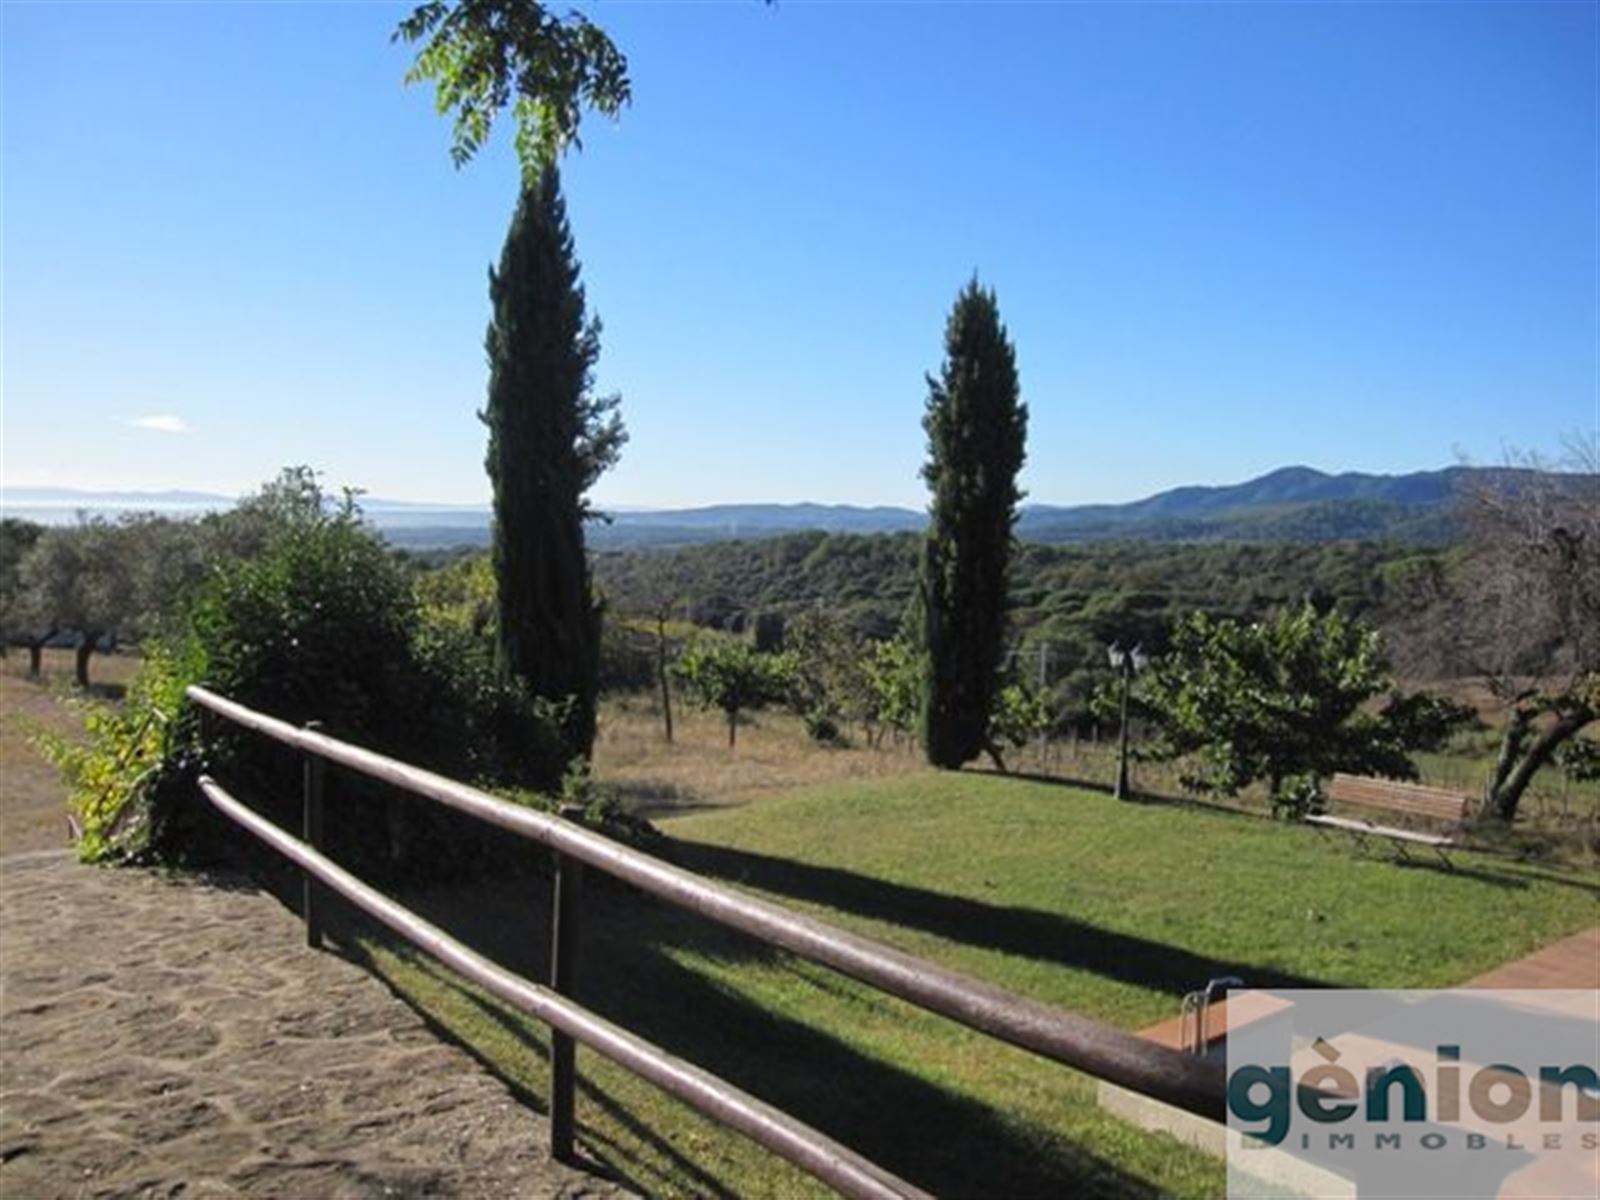 FARMHOUSE IN CANET D’ADRI, BESIDE GIRONA. 550M² BUILT AND 1,93HA OF LAND